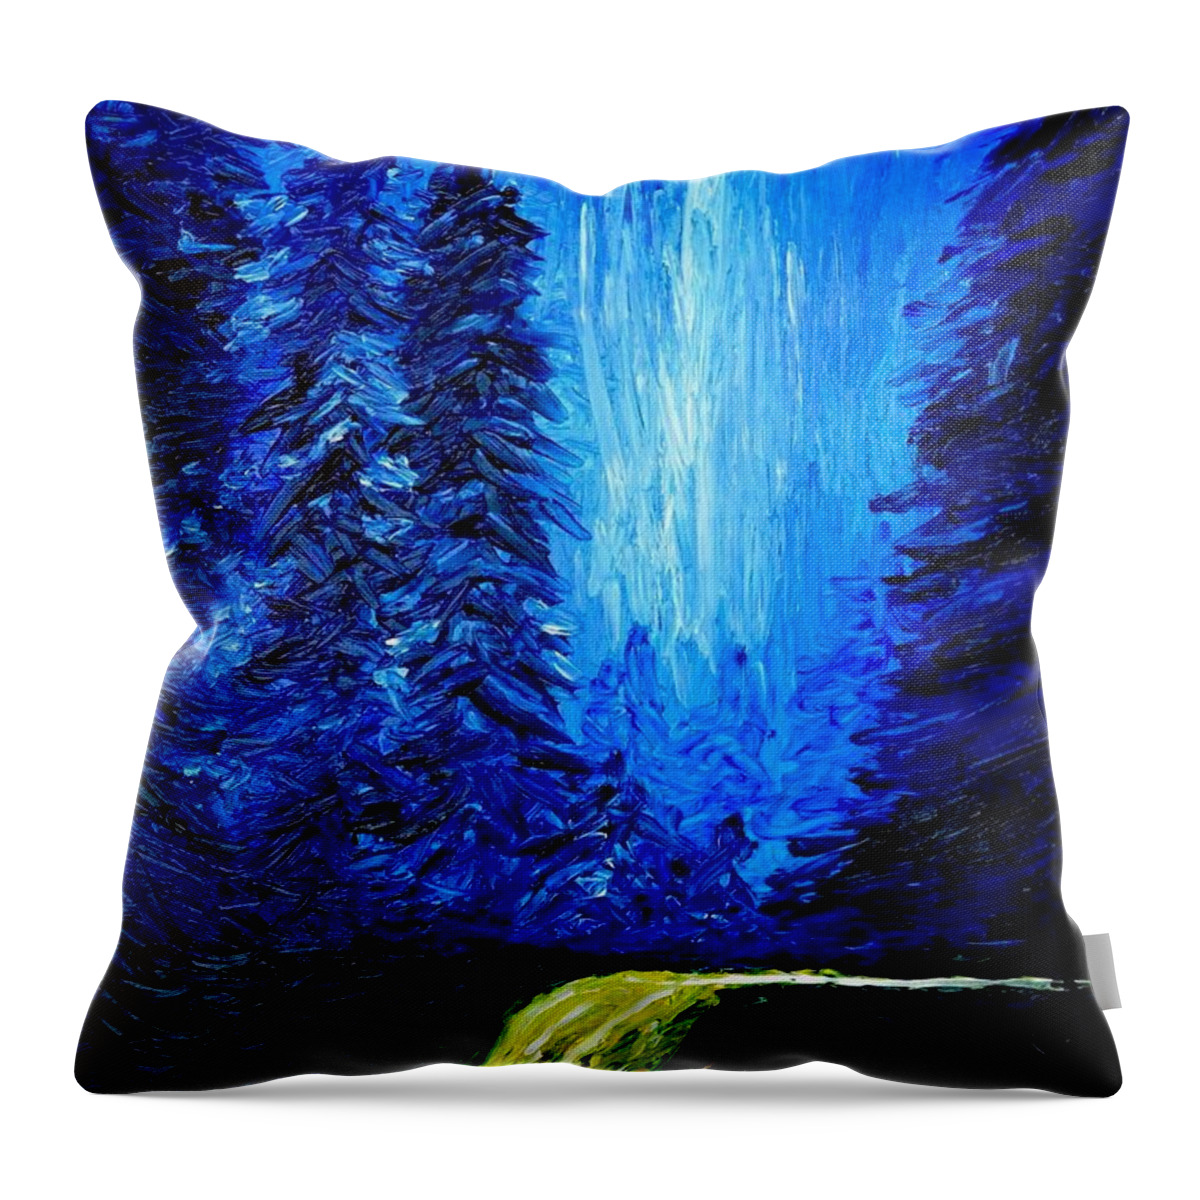 Blue Throw Pillow featuring the painting Escape by Chiara Magni